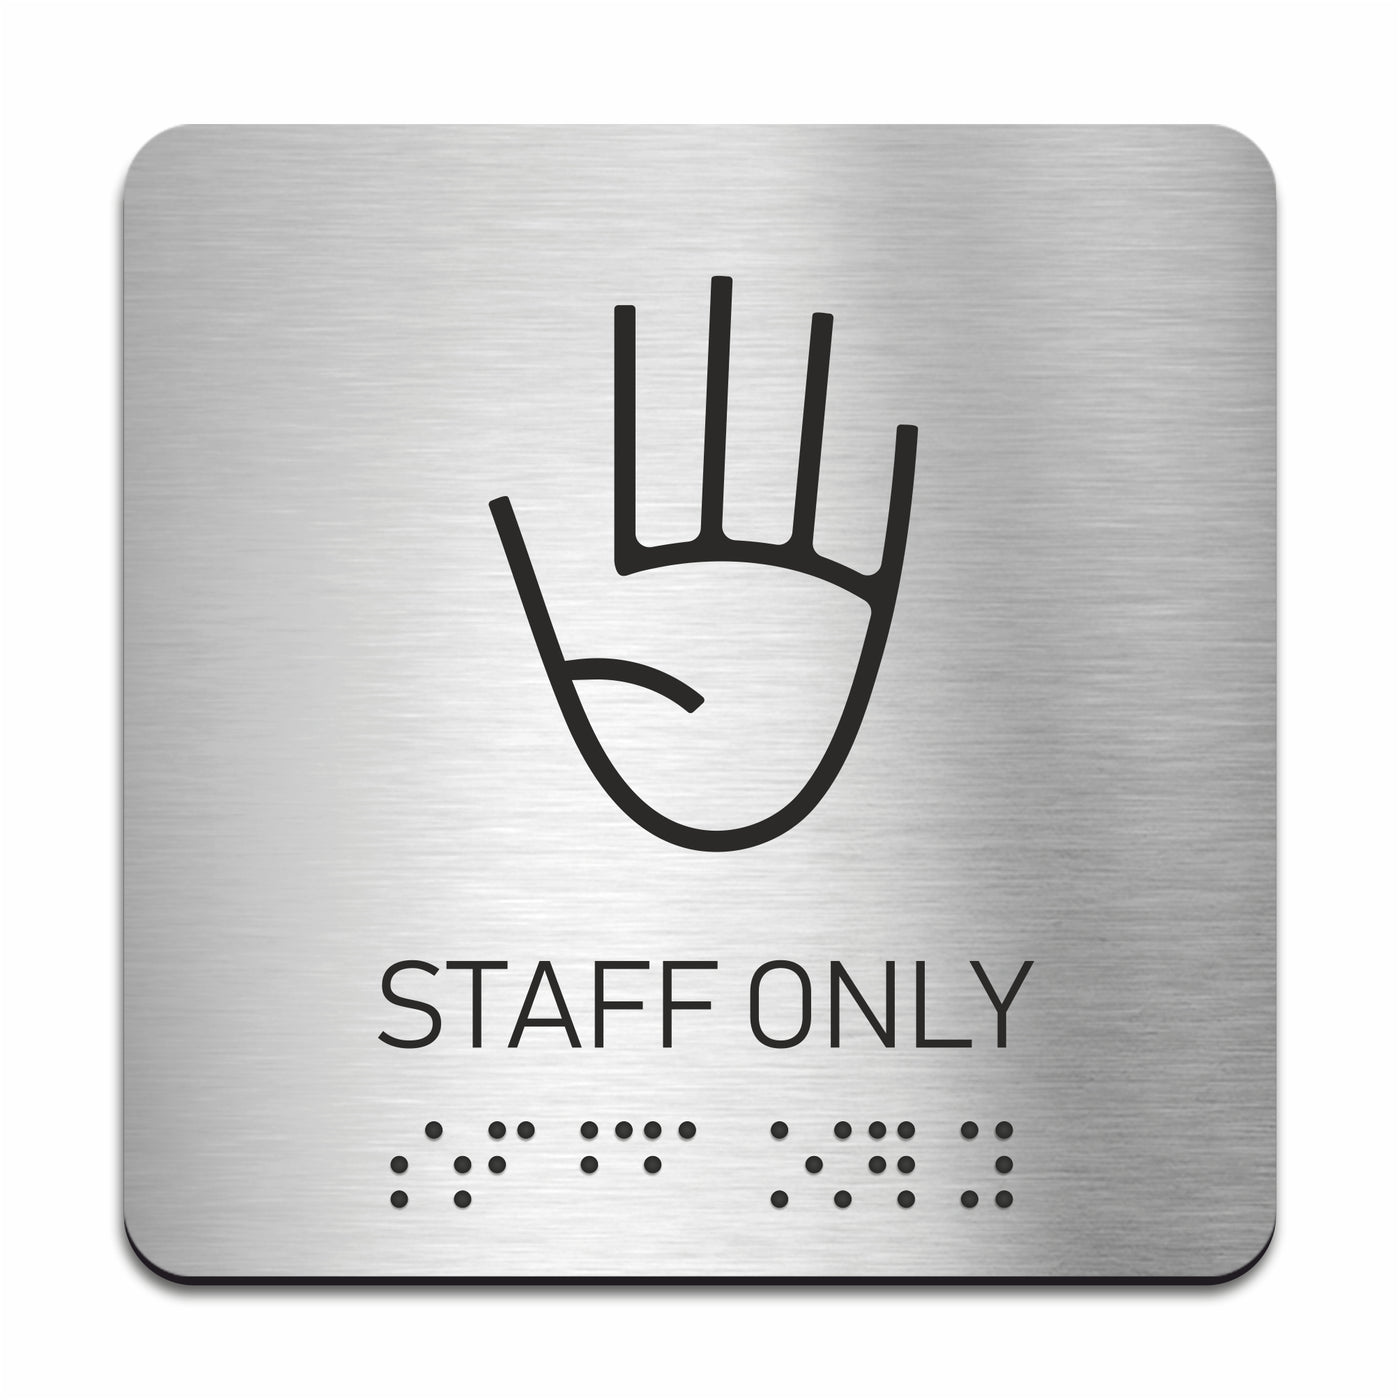 Steel Staff Only Sign with Braille